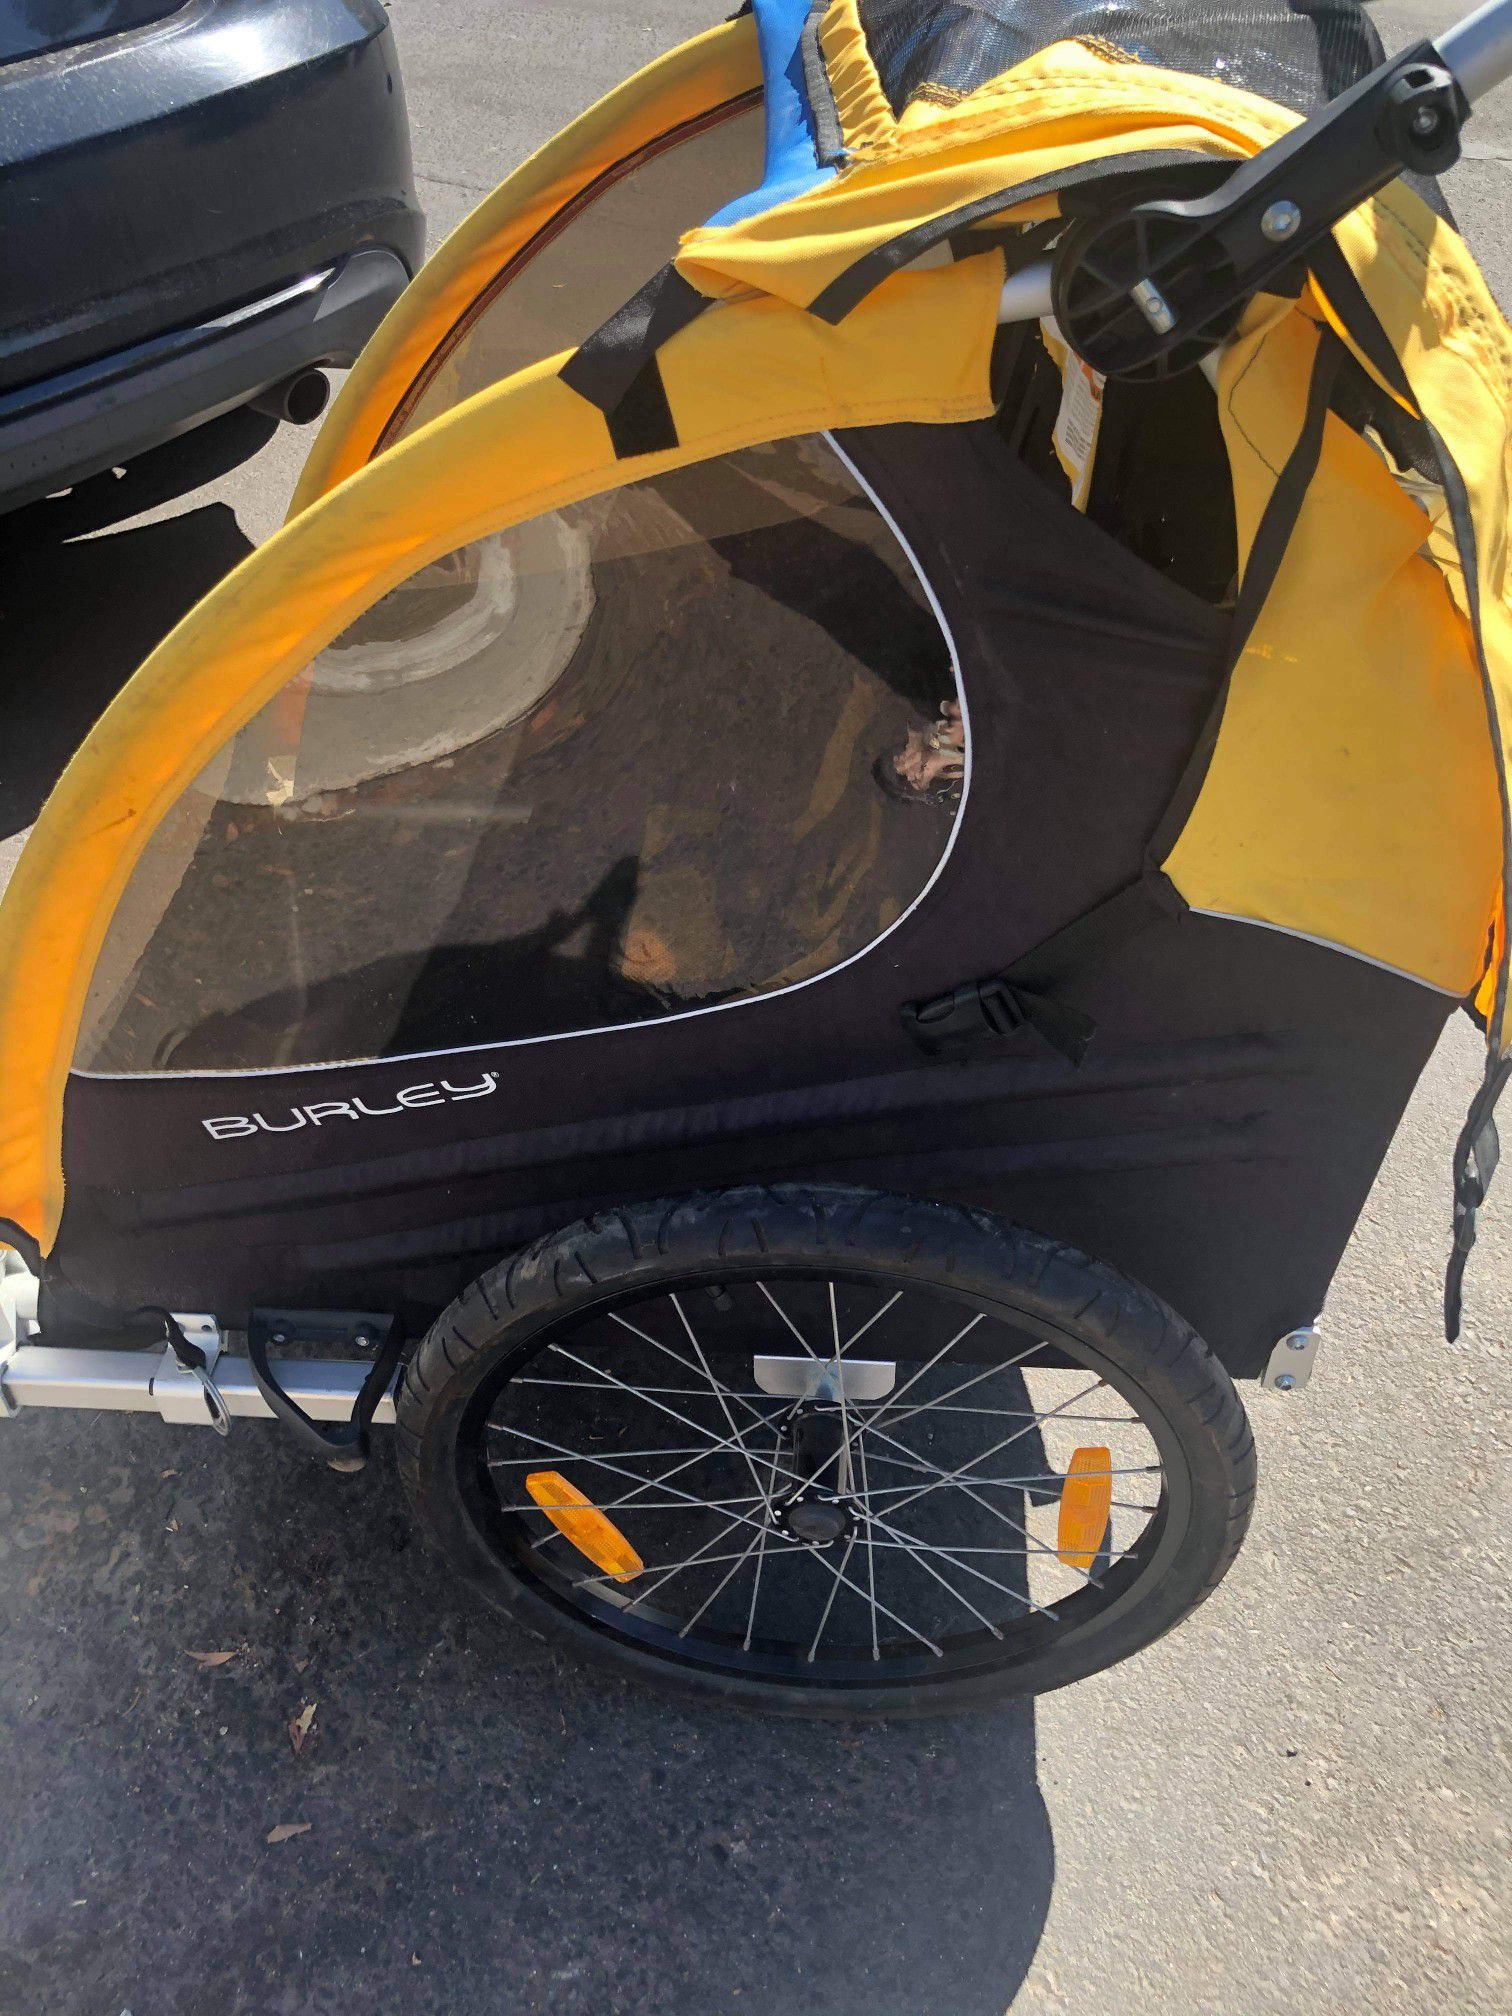 Burley child carrier and bike trailer for 2 kids